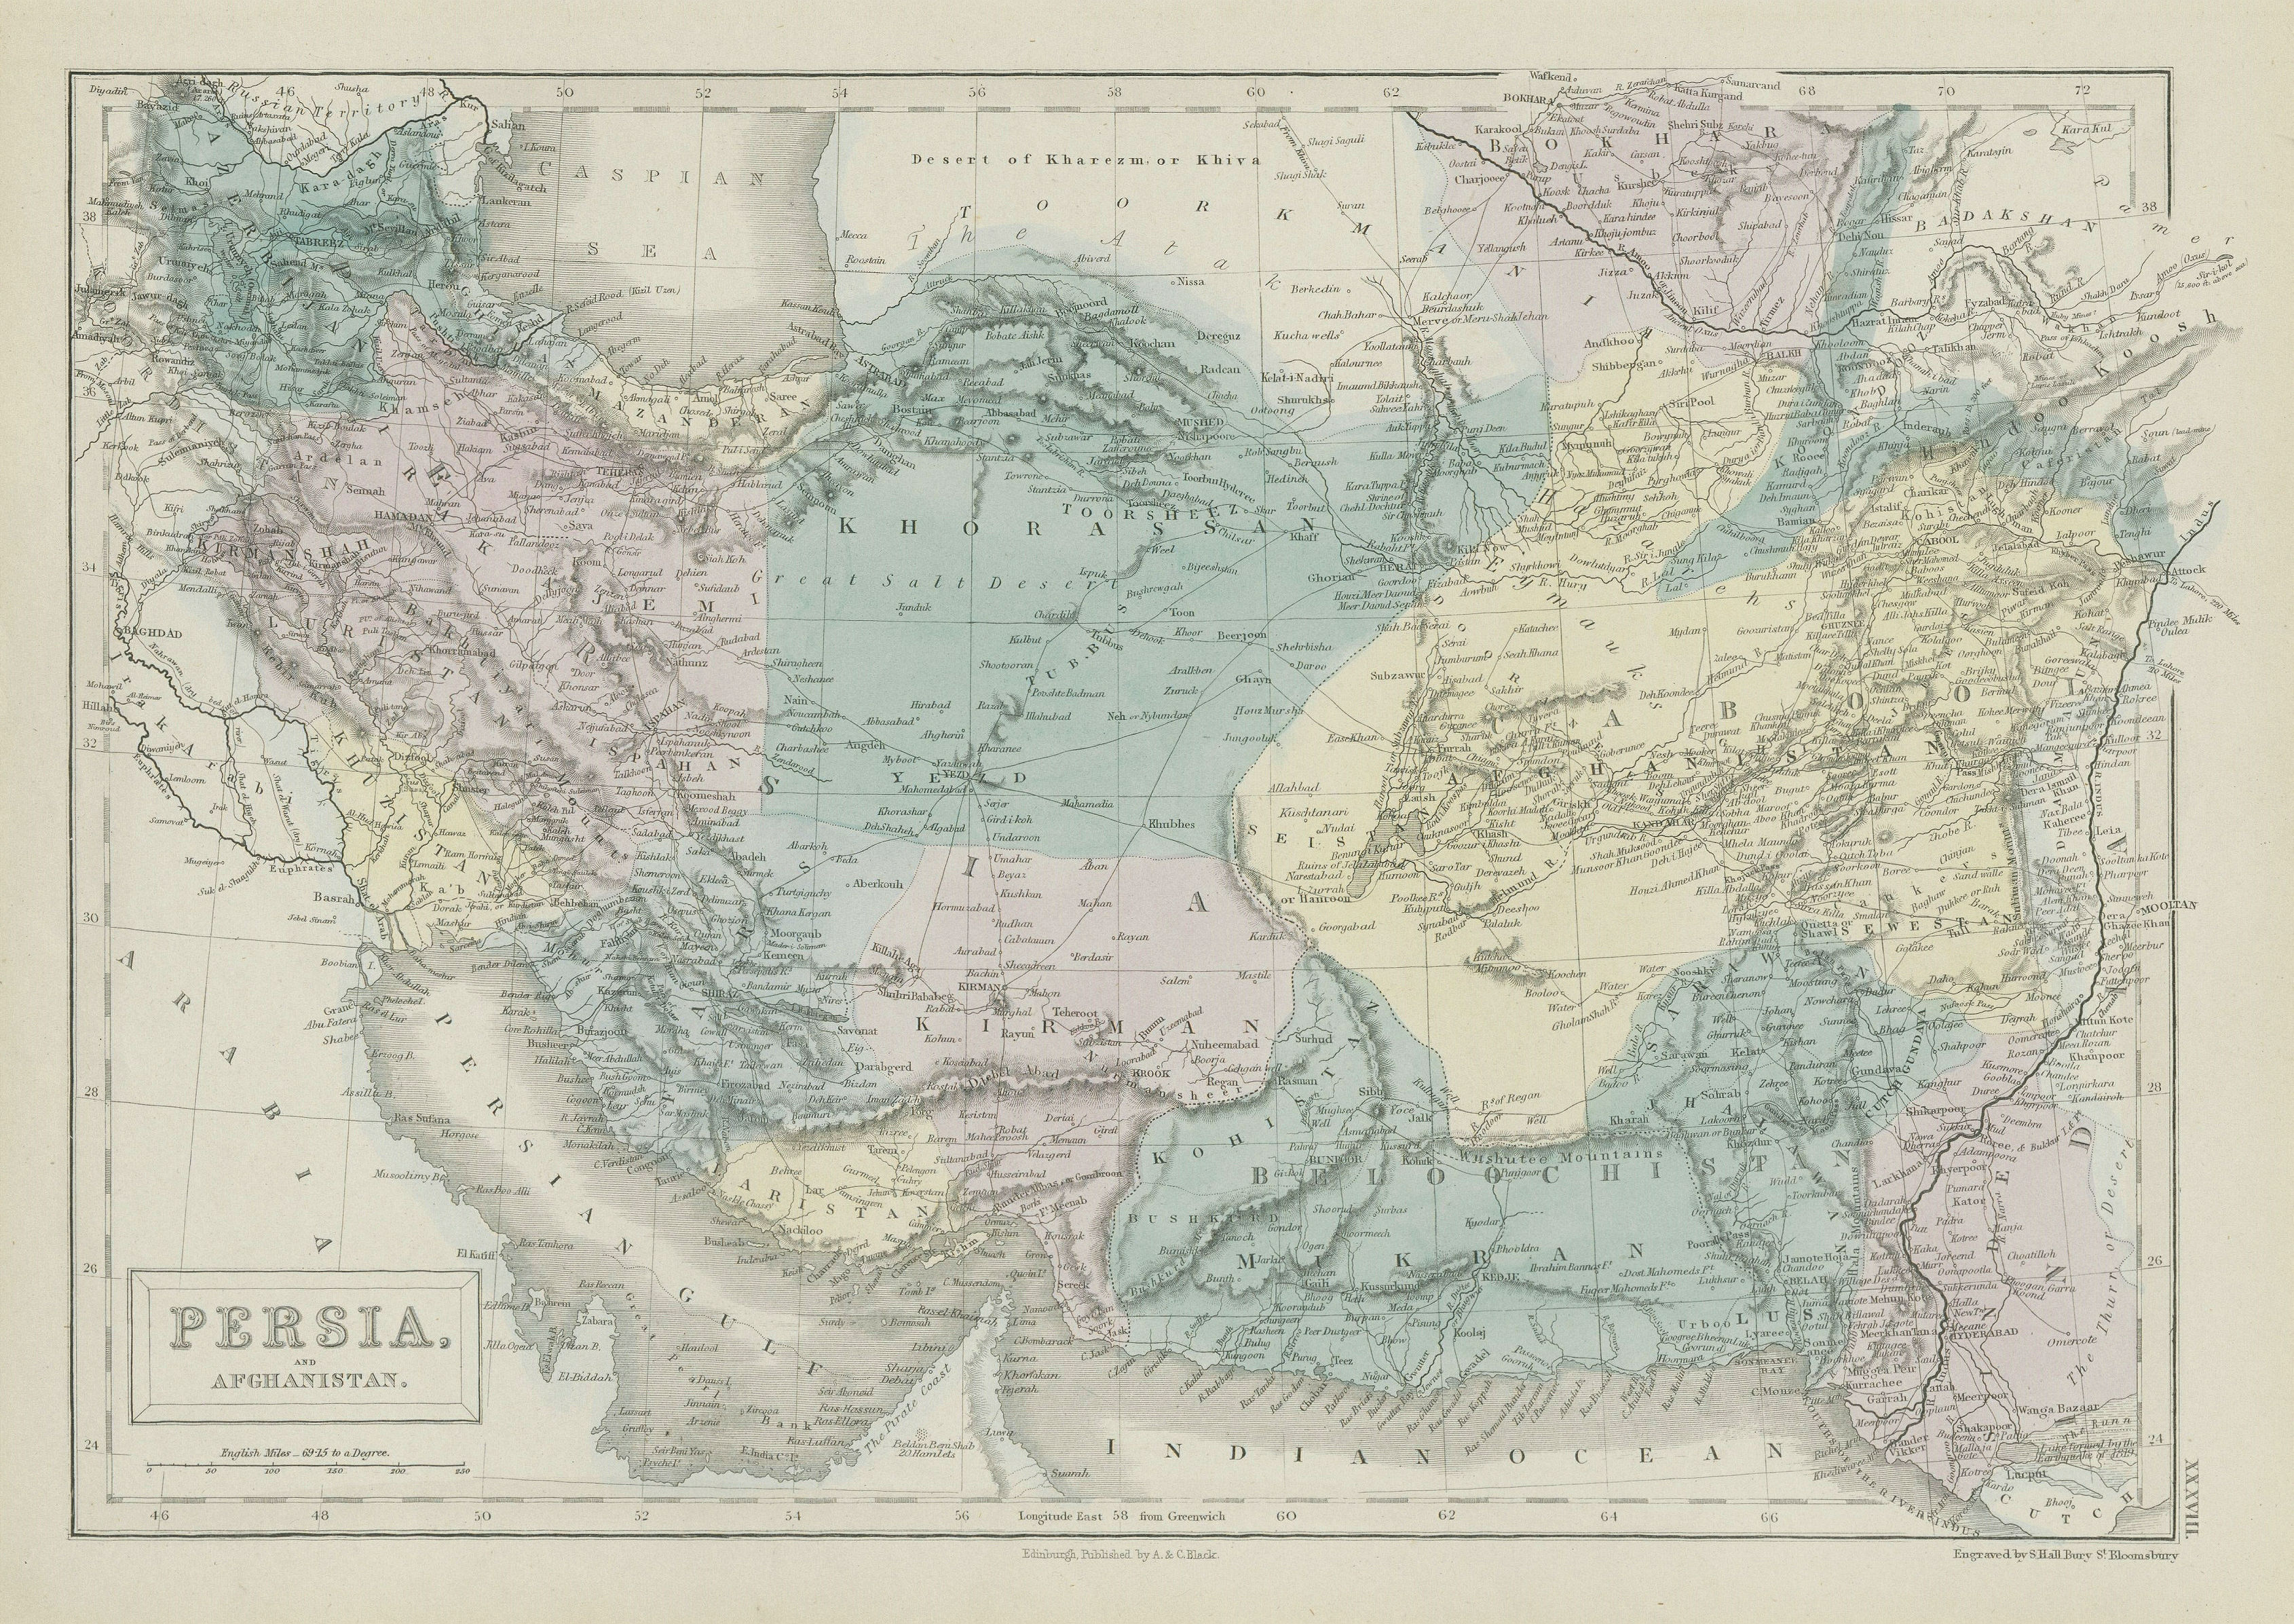 Associate Product Persia and Afghanistan. Iran. South west Asia. SIDNEY HALL 1856 old map